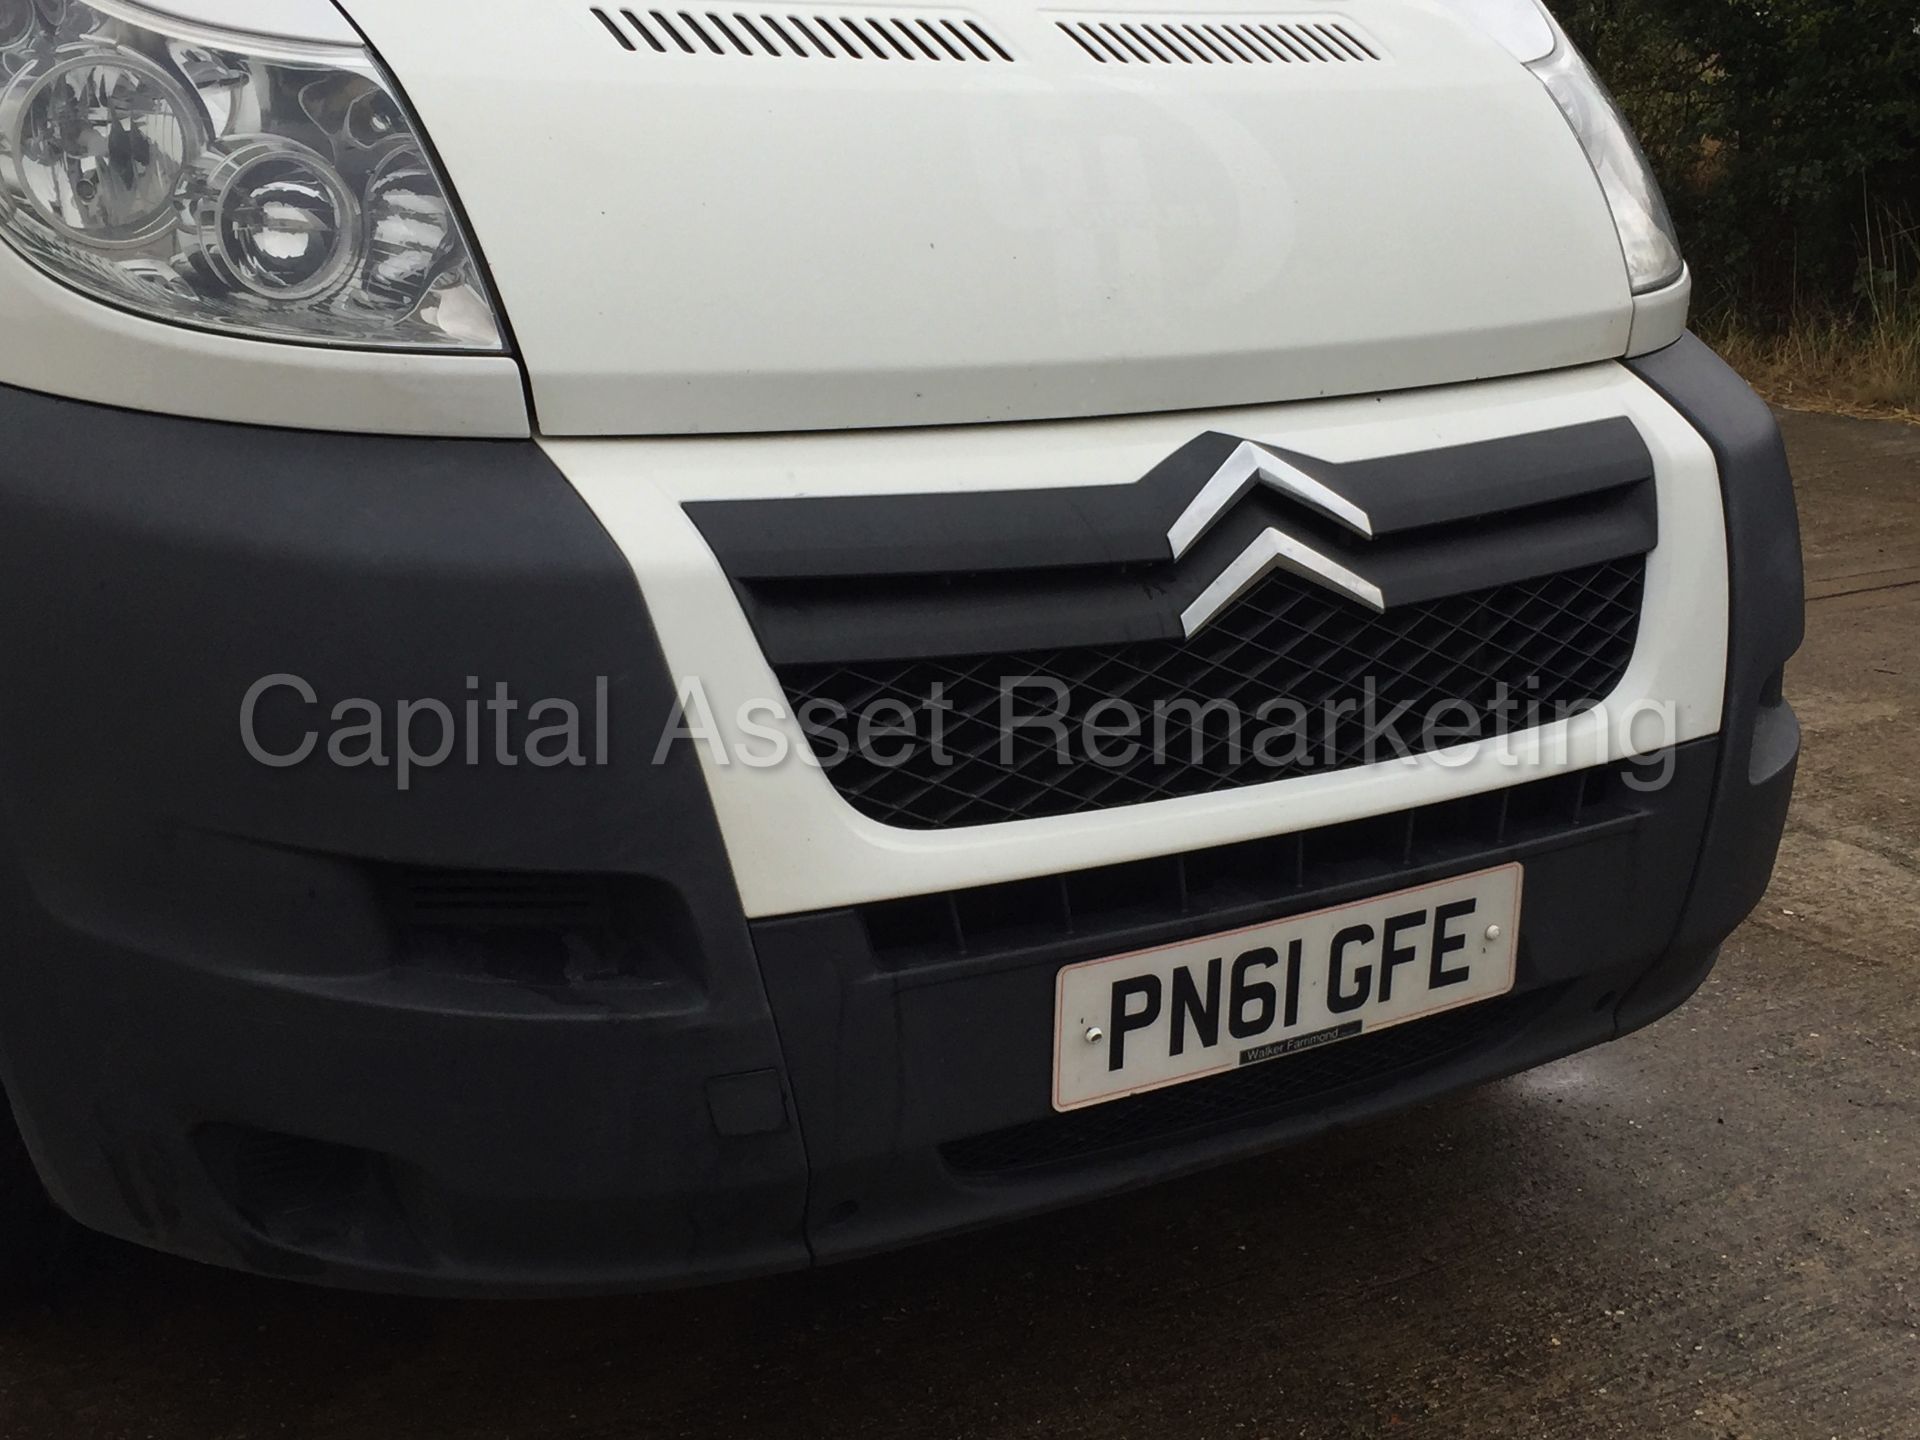 (ON SALE) CITROEN RELAY 35 'LWB HI-ROOF' (2012 MODEL) '2.2 HDI - 120 BHP - 6 SPEED' (1 FORMER OWNER) - Image 9 of 19